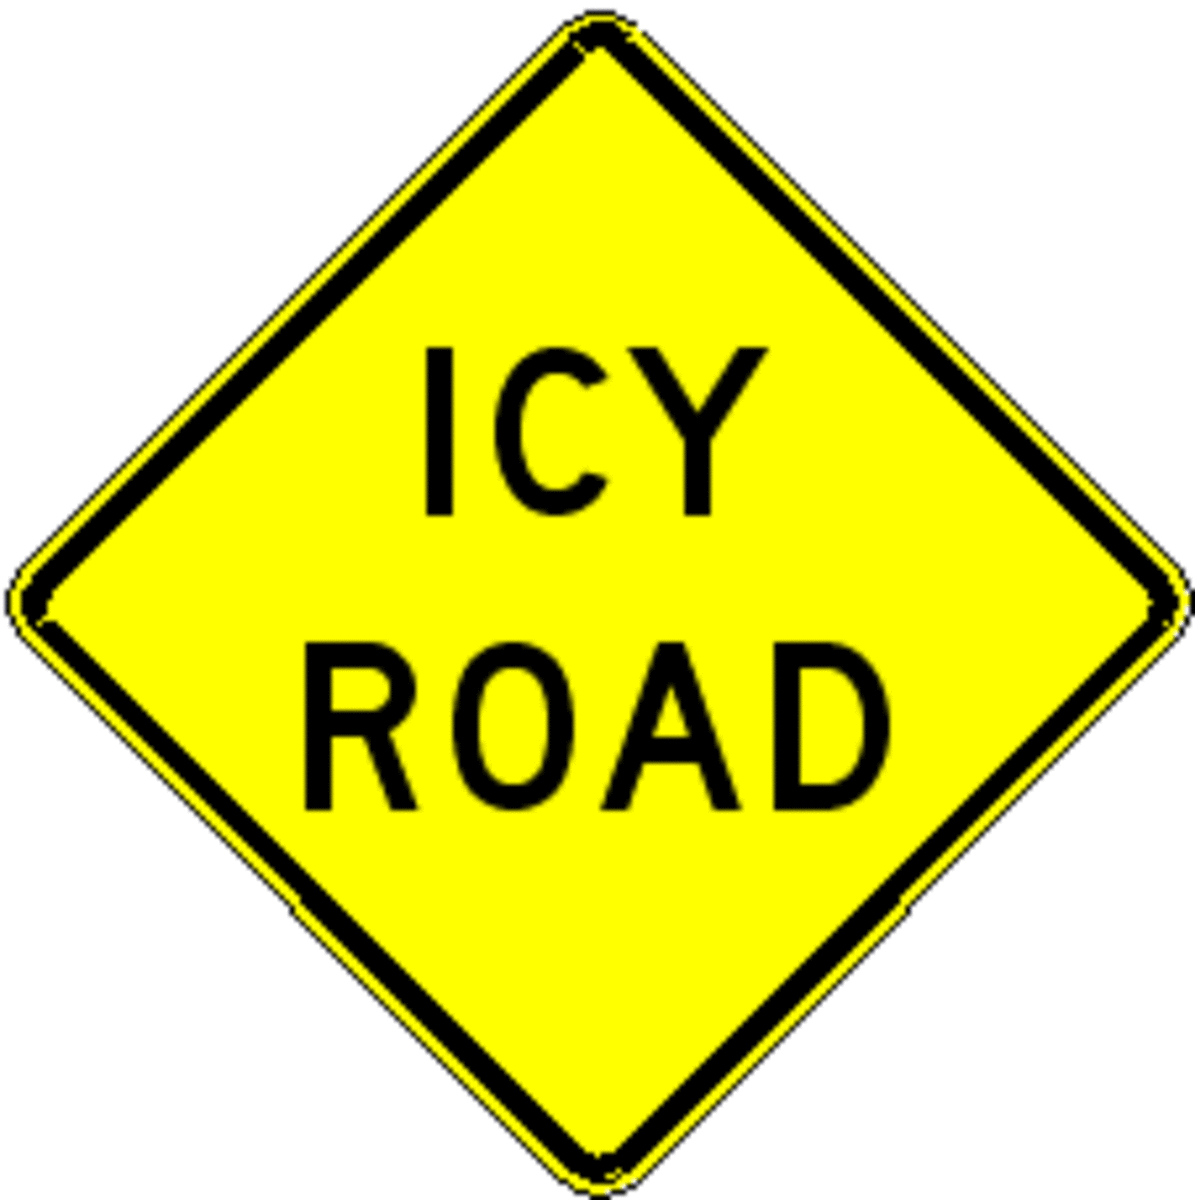 Are you prepared to drive on an icy road in a big truck?